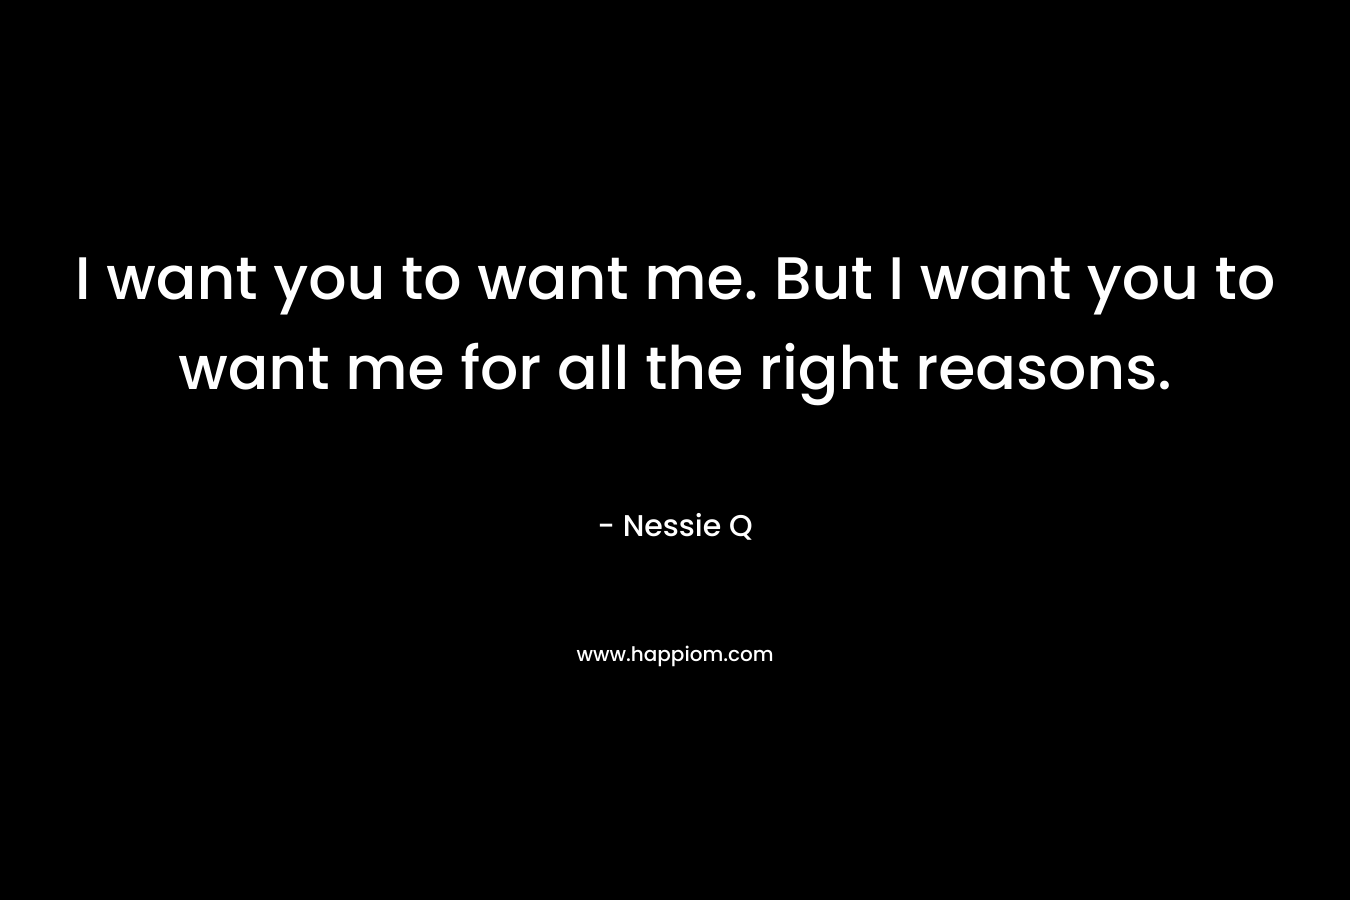 I want you to want me. But I want you to want me for all the right reasons.